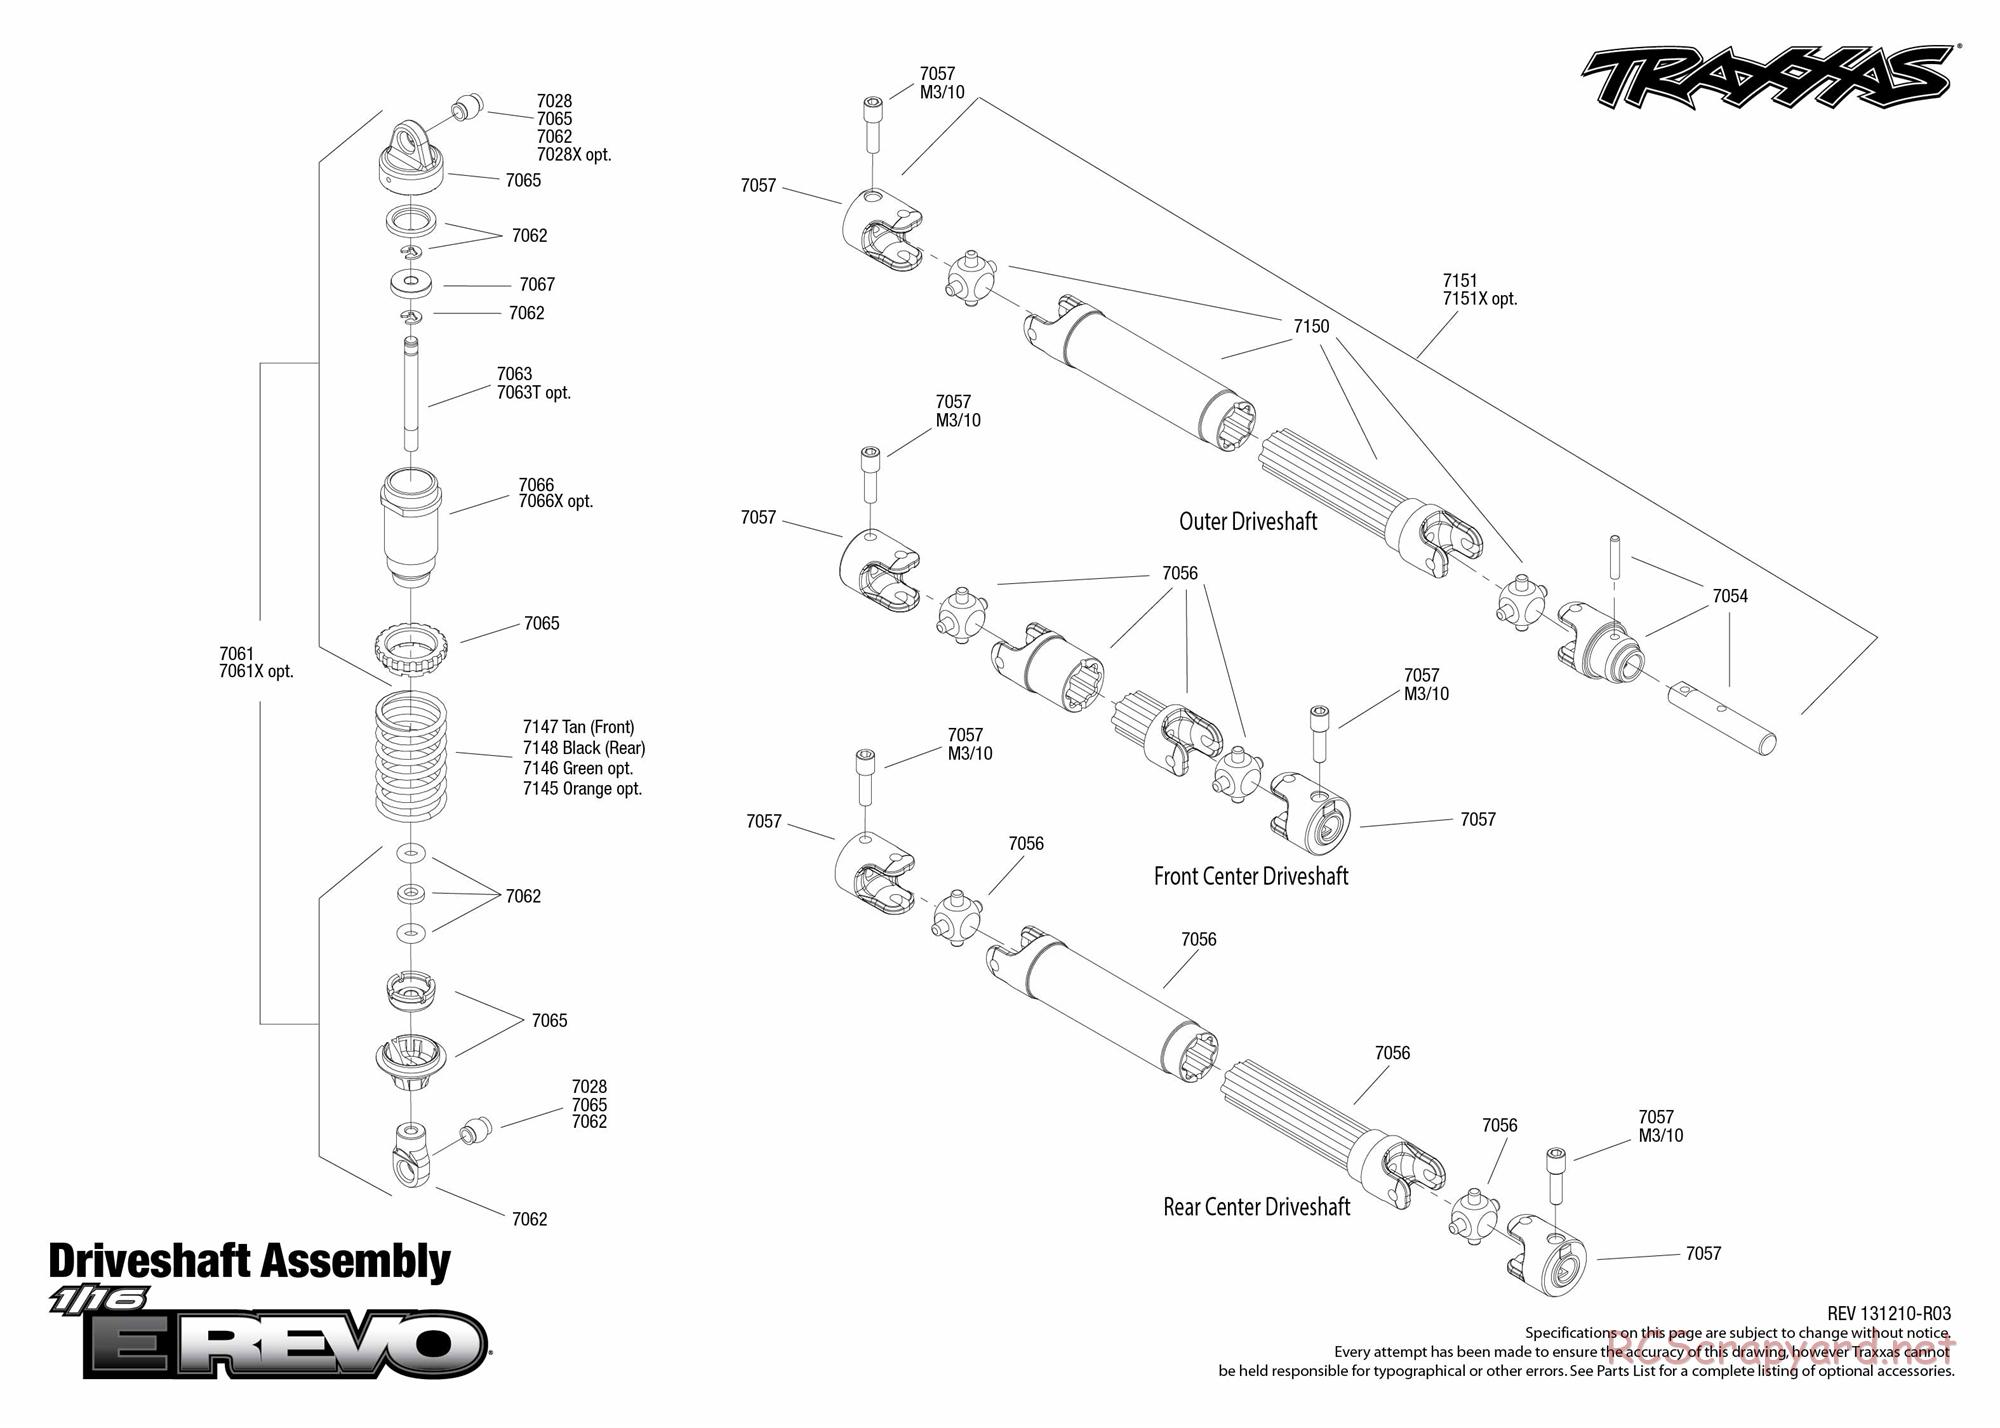 Traxxas - 1/16 E-Revo Brushed (2013) - Exploded Views - Page 2